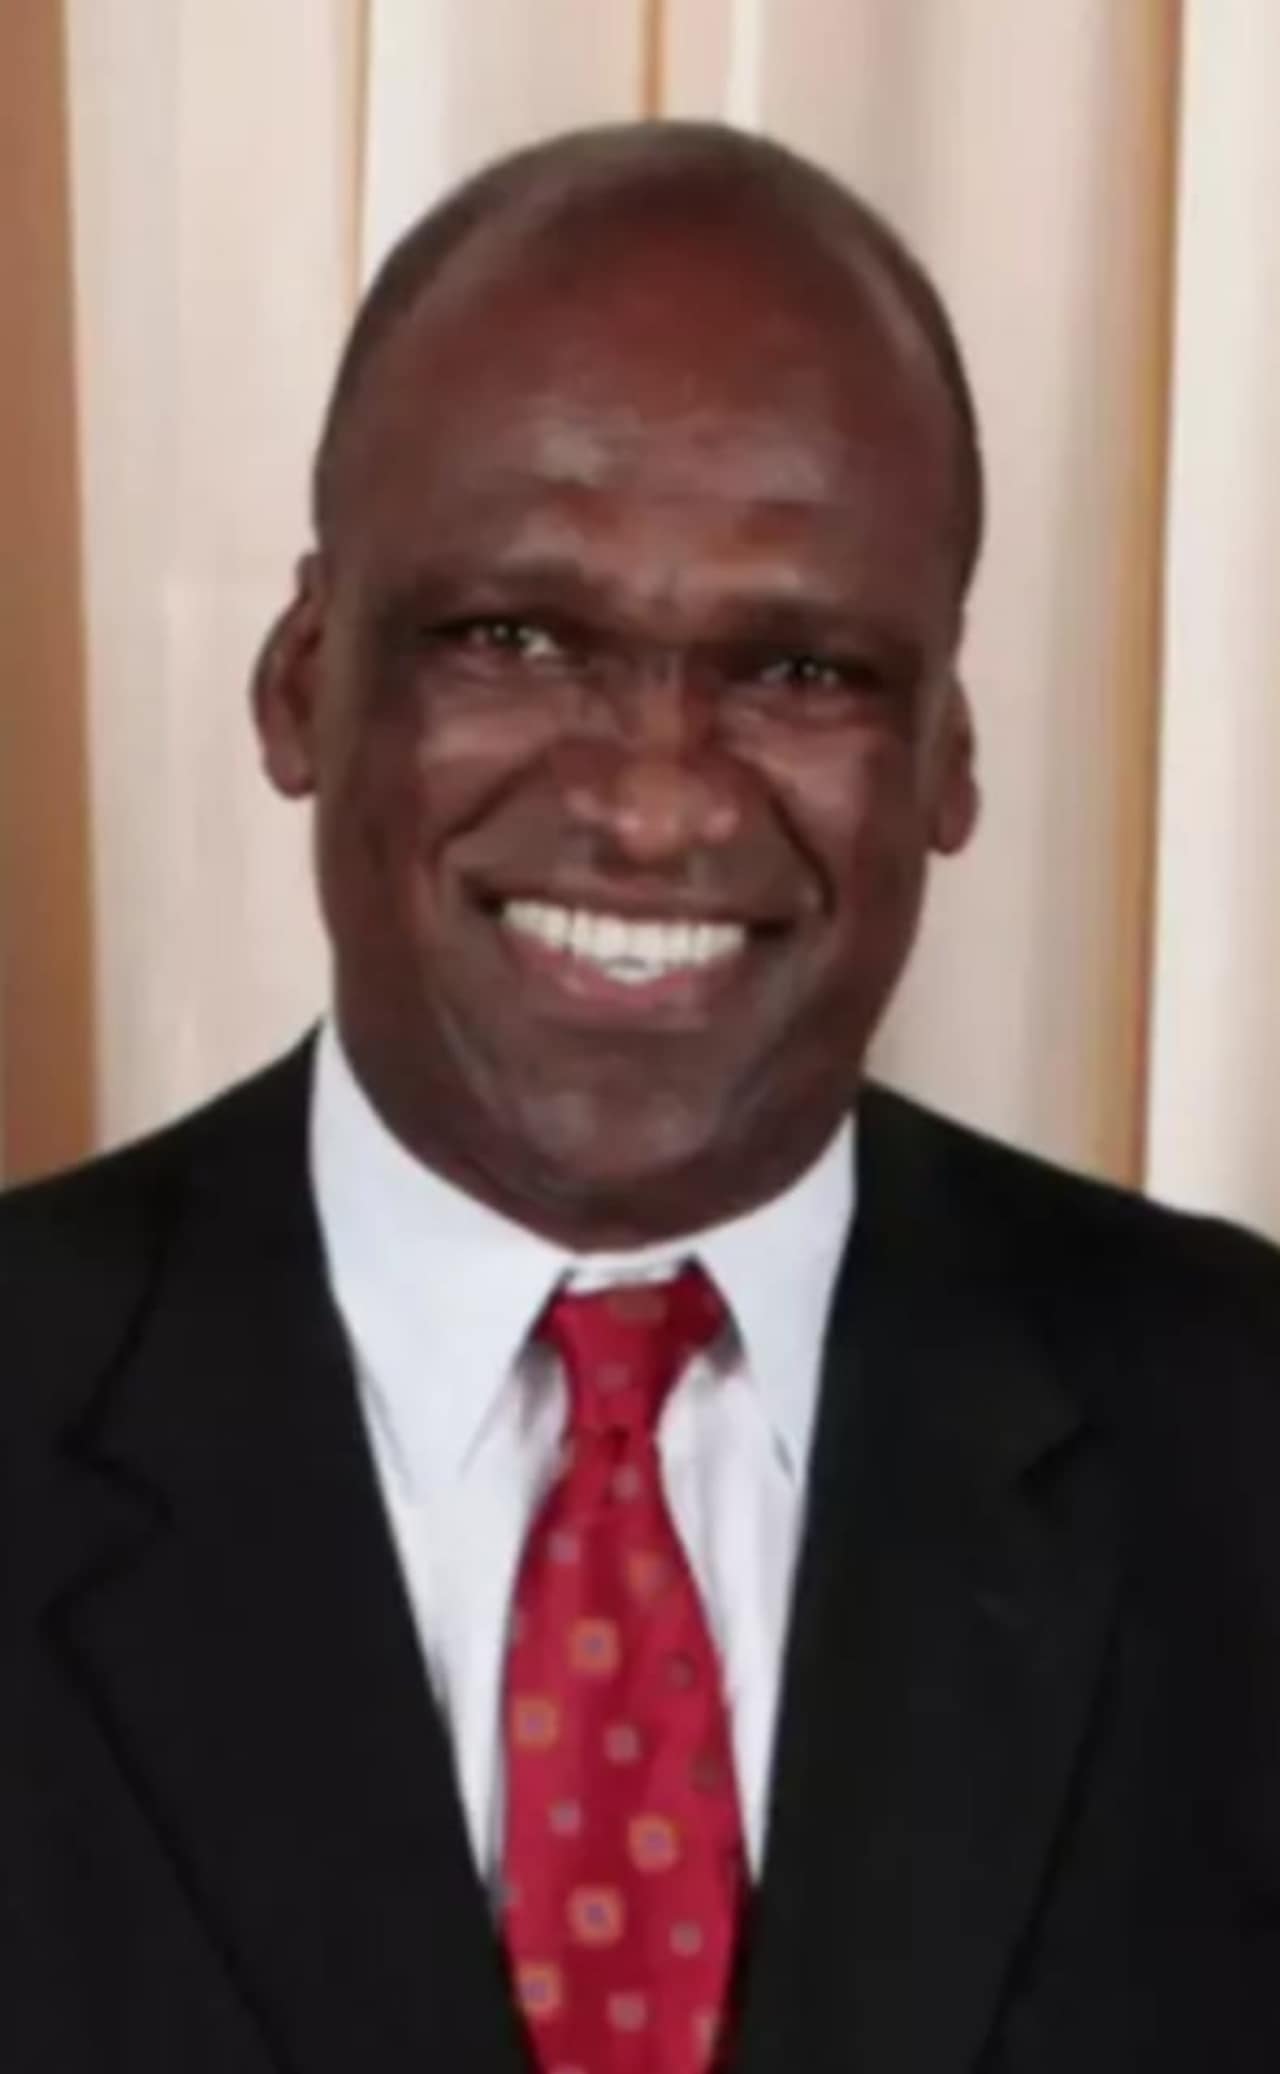 John Ashe, the former president of the United Nations General Assembly.